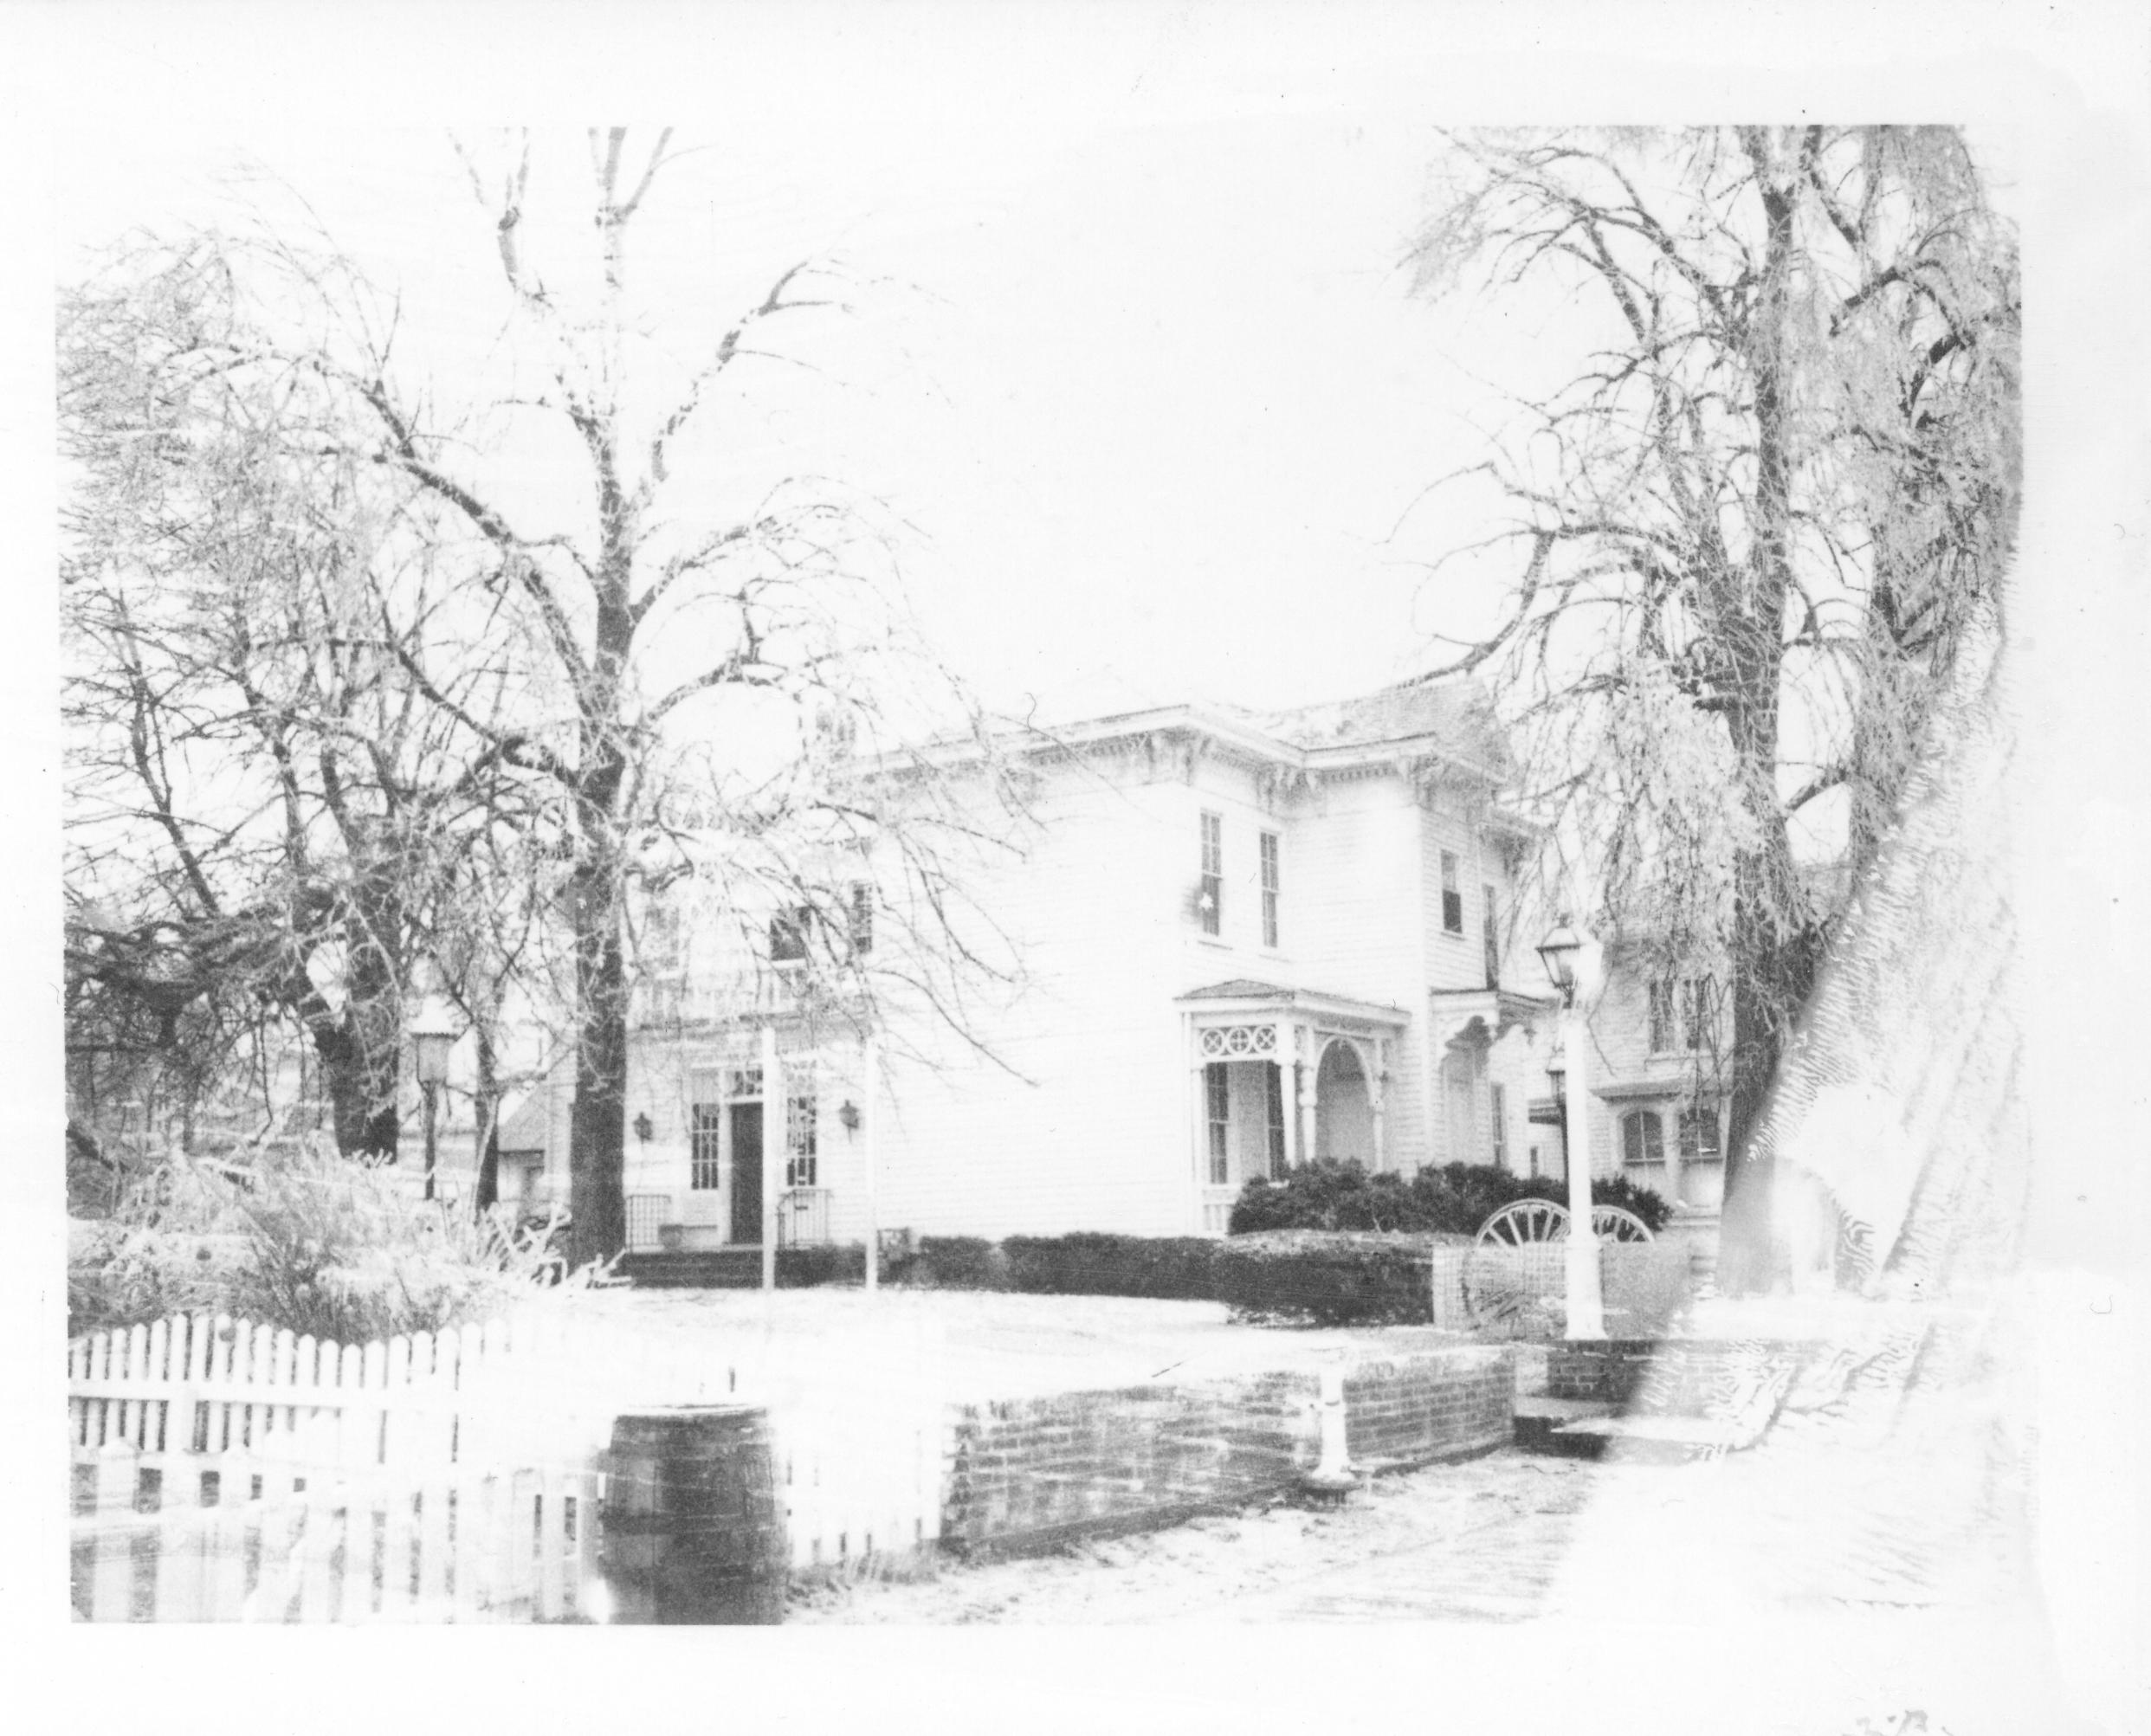 Ice Storm - Dean House photo taken from near 8th & Jackson streets, Lyon House on right looking Northwest Dean, Ice Storm, Cannon